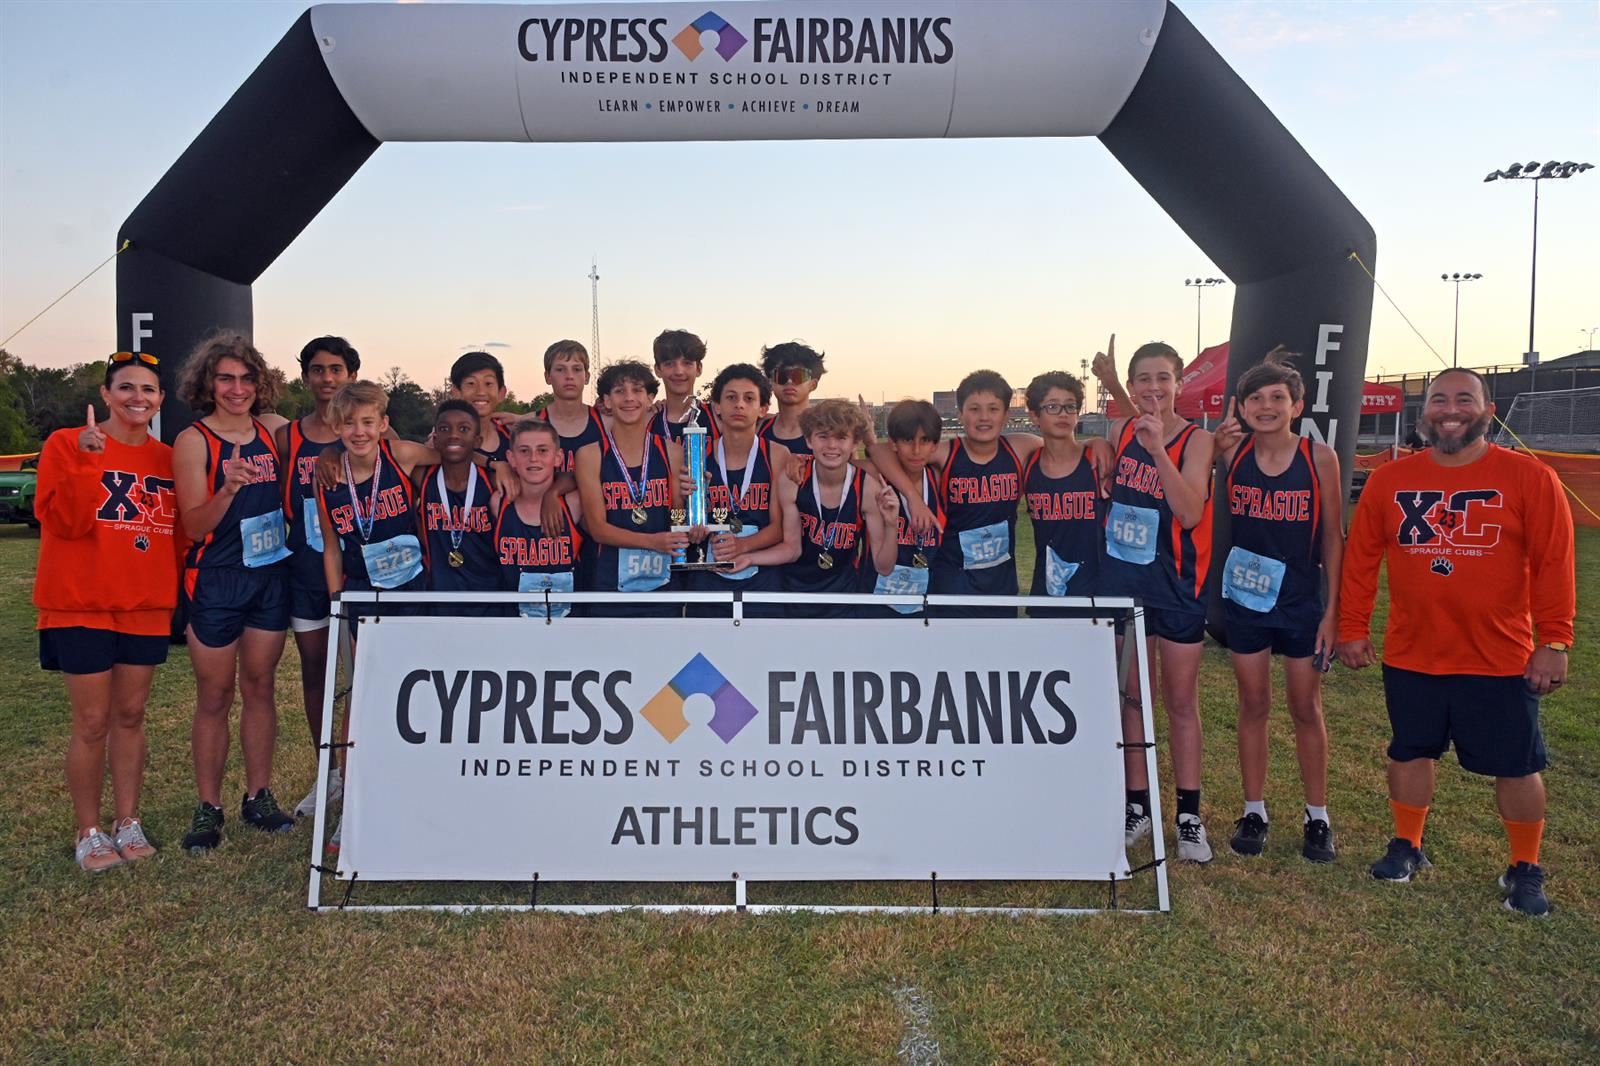 Sprague Middle School won the eighth grade boys’ cross country team title with 32 points on Oct. 18 at Cy Woods High School.